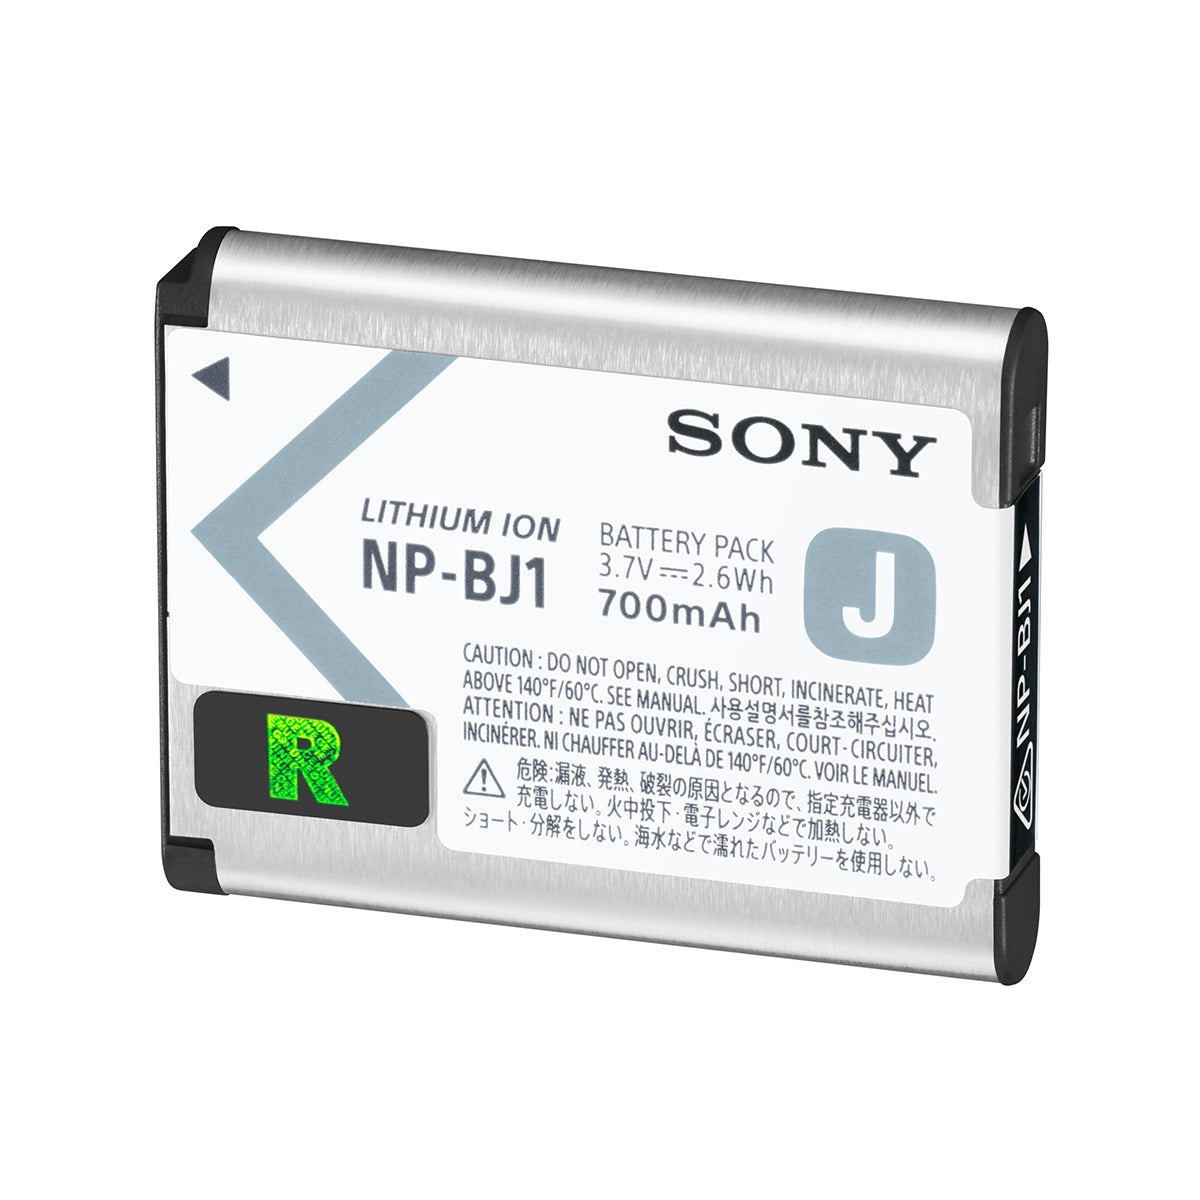 Sony NP-BJ1 Lithium-Ion Rechargeable Battery (700mAh) J Type